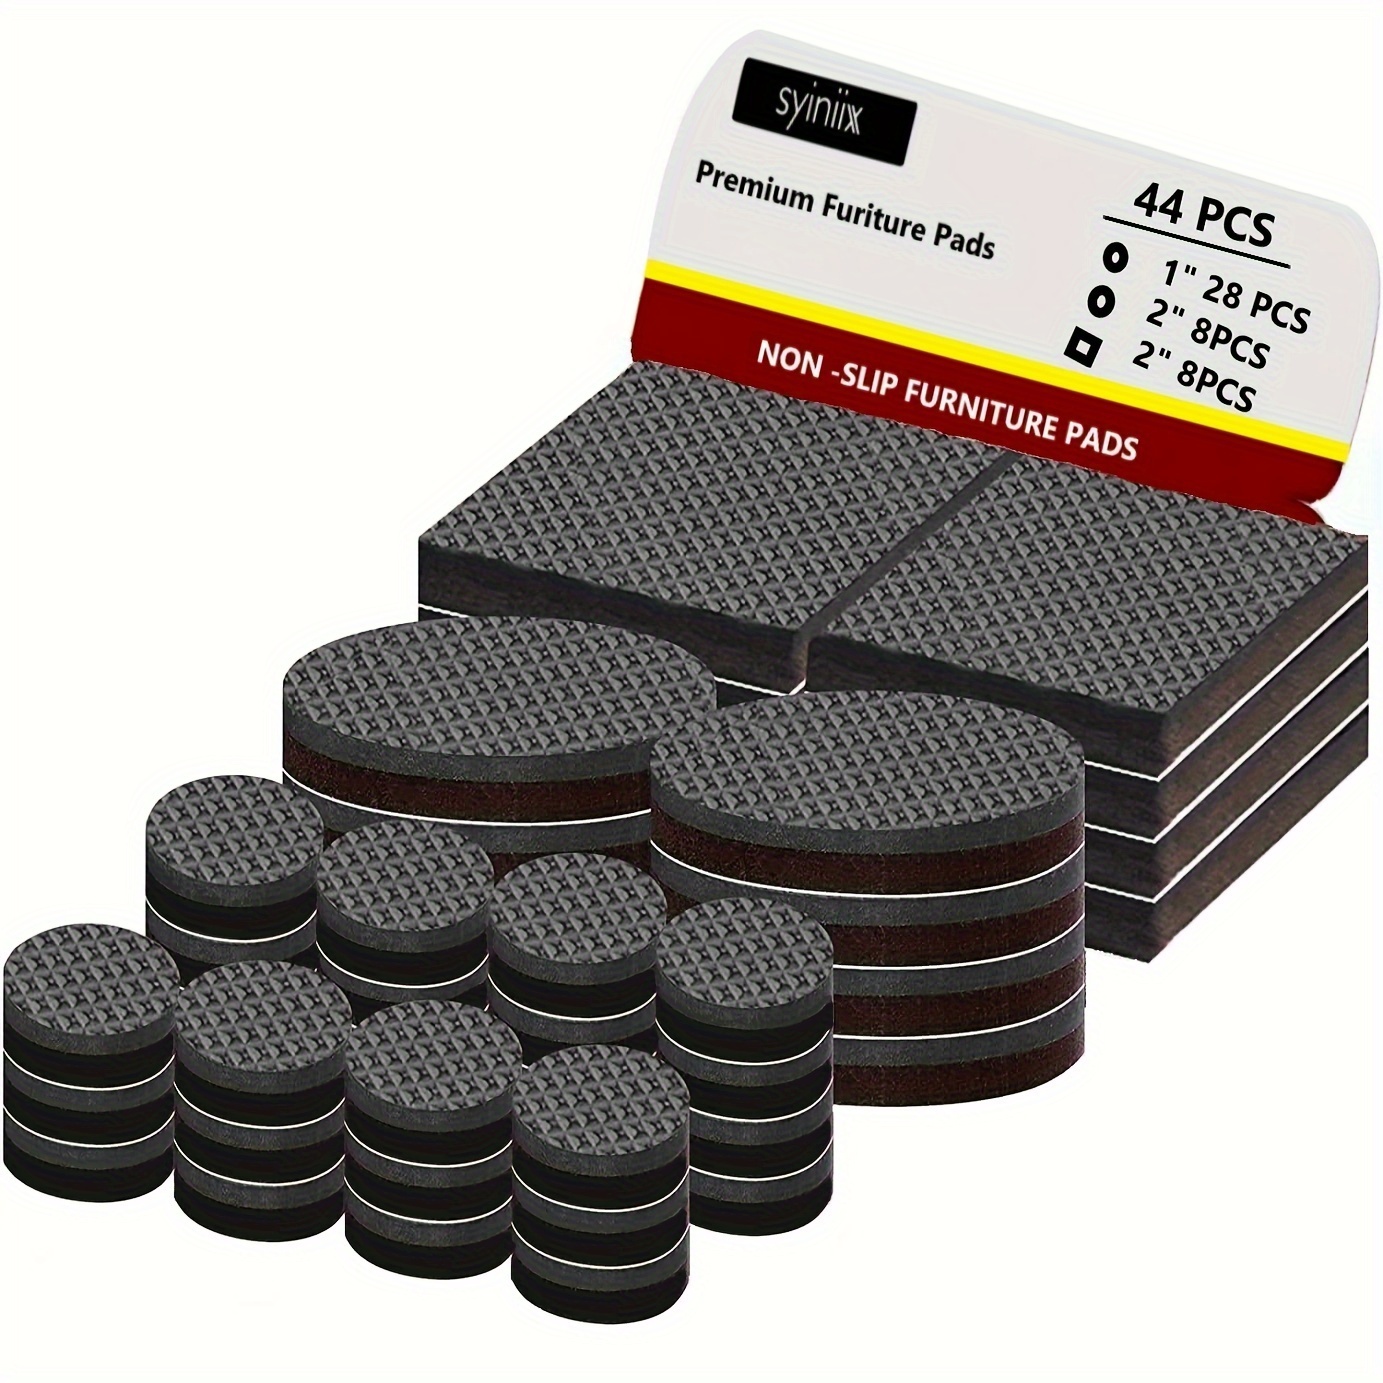 Premium Non Slip Furniture Pads 16 Piece 2. Best Selfadhesive Furniture Grippers Furniture Stoppers with Rubber Pad Ideal As Floor Protectors & Couch